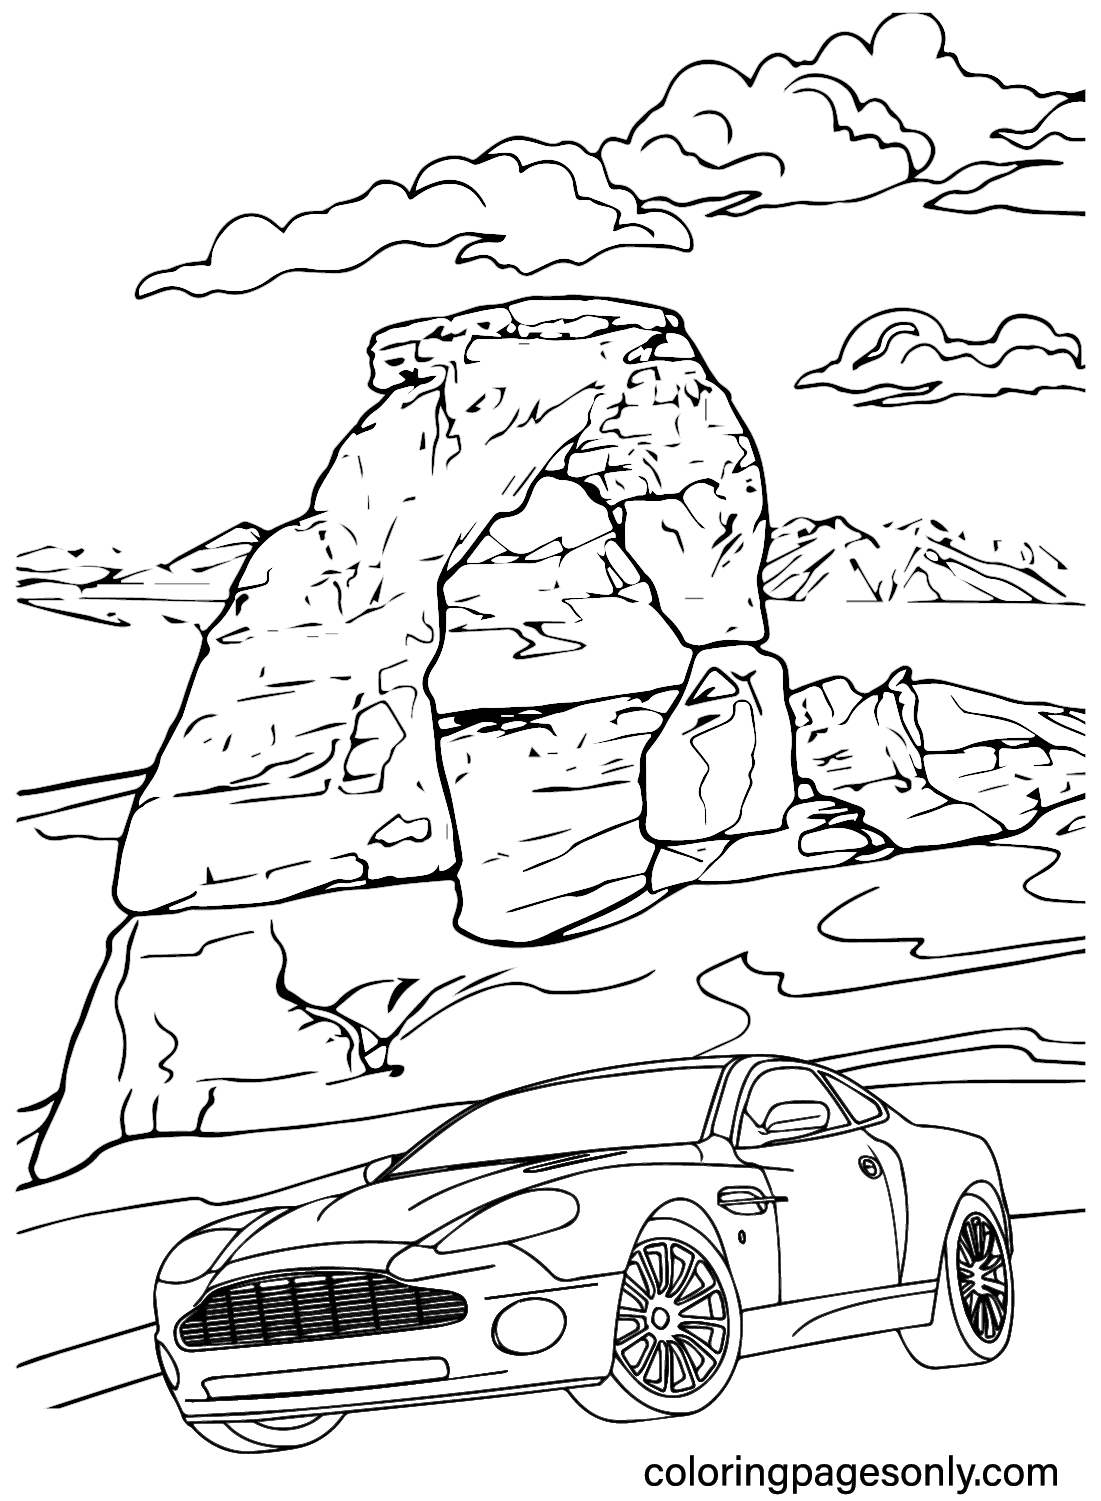 Aston Martin Coloring Pages to for Kids from Aston Martin